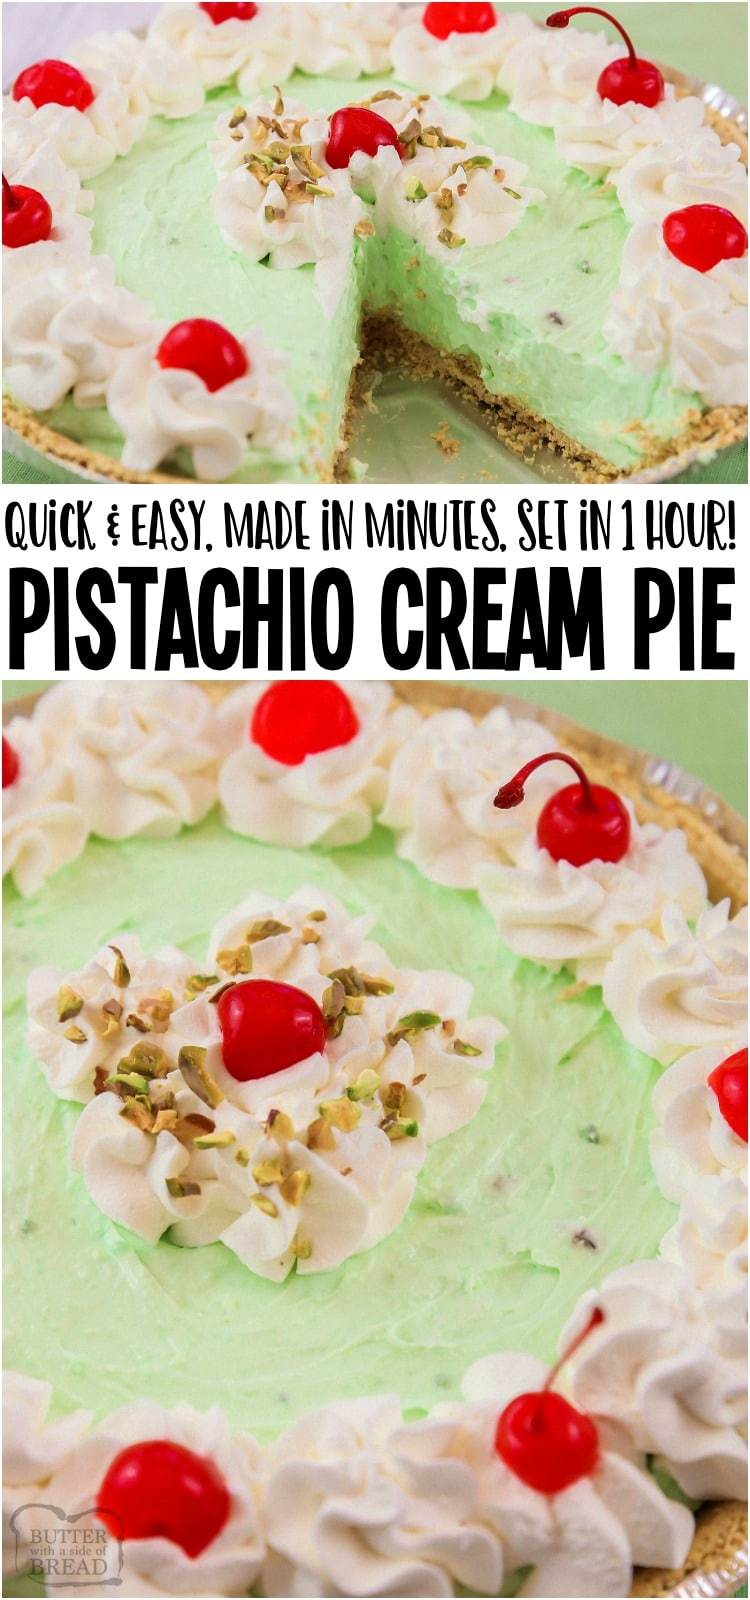 Easy Pistachio Cream Pie with just 5 ingredients and made in minutes! Ready to serve in an hour & perfectly sweet and creamy with delicious pistachio flavor. Perfect for St. Patrick's Day or anytime! #pistachio #pie #creampie #nobake #easypie #dessert #recipe #StPatricksDay #green from BUTTER WITH A SIDE OF BREAD